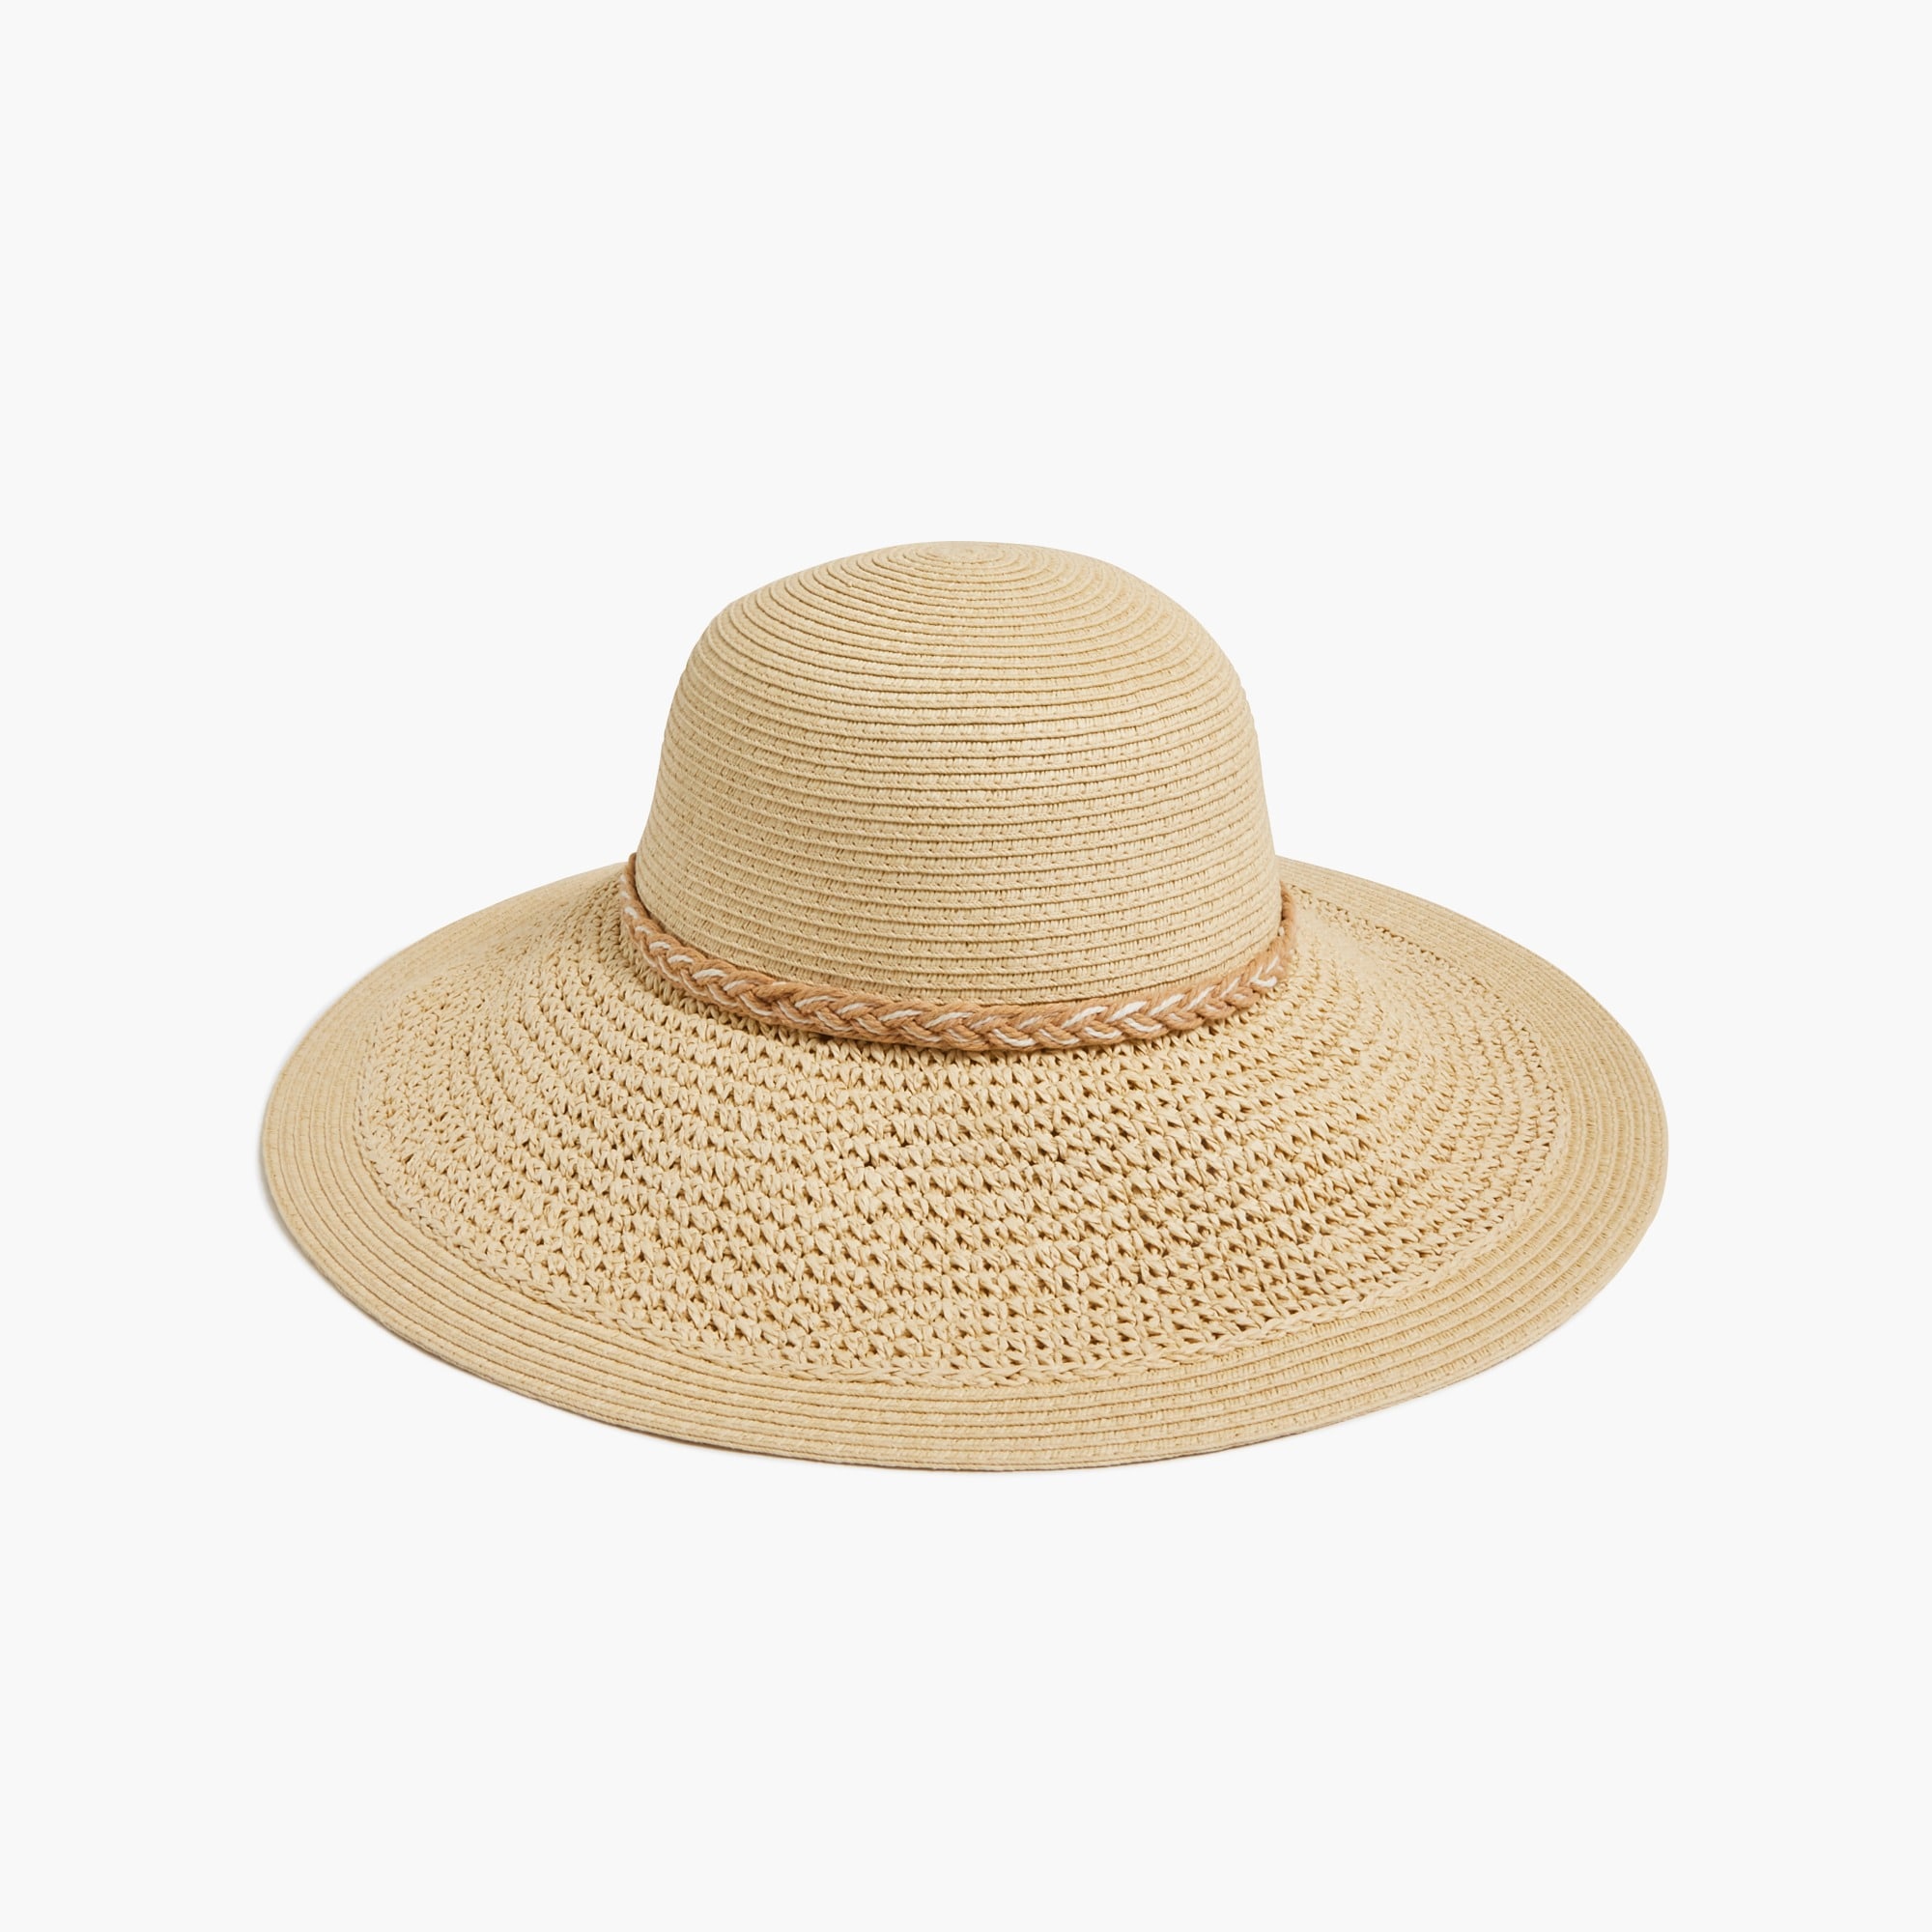 Jcrew Straw hat with wrapped rope